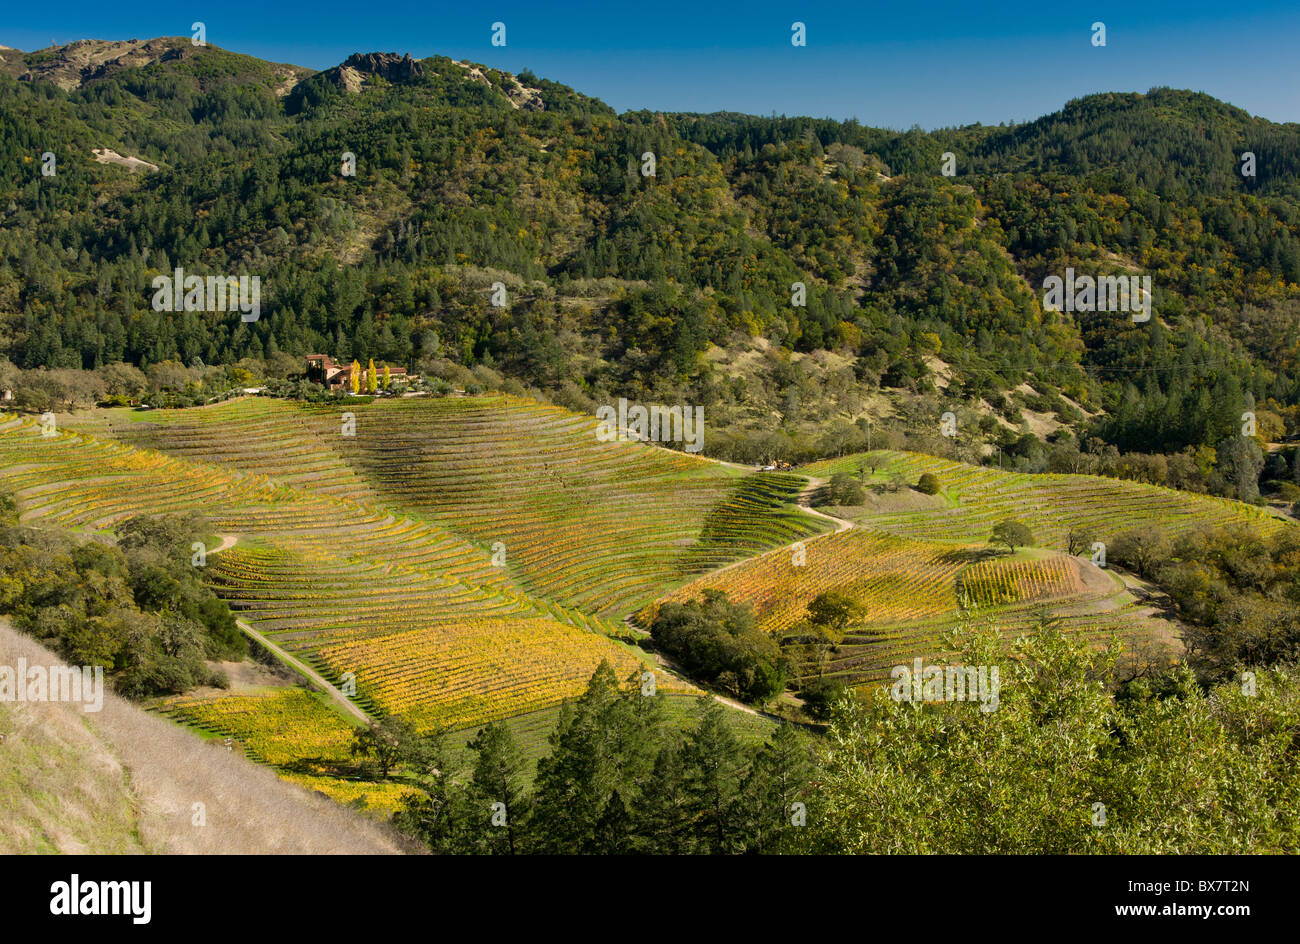 Autumn colour in the Napa Valley vineyards, above Calistoga in the Pallisade Mountains; California. Stock Photo